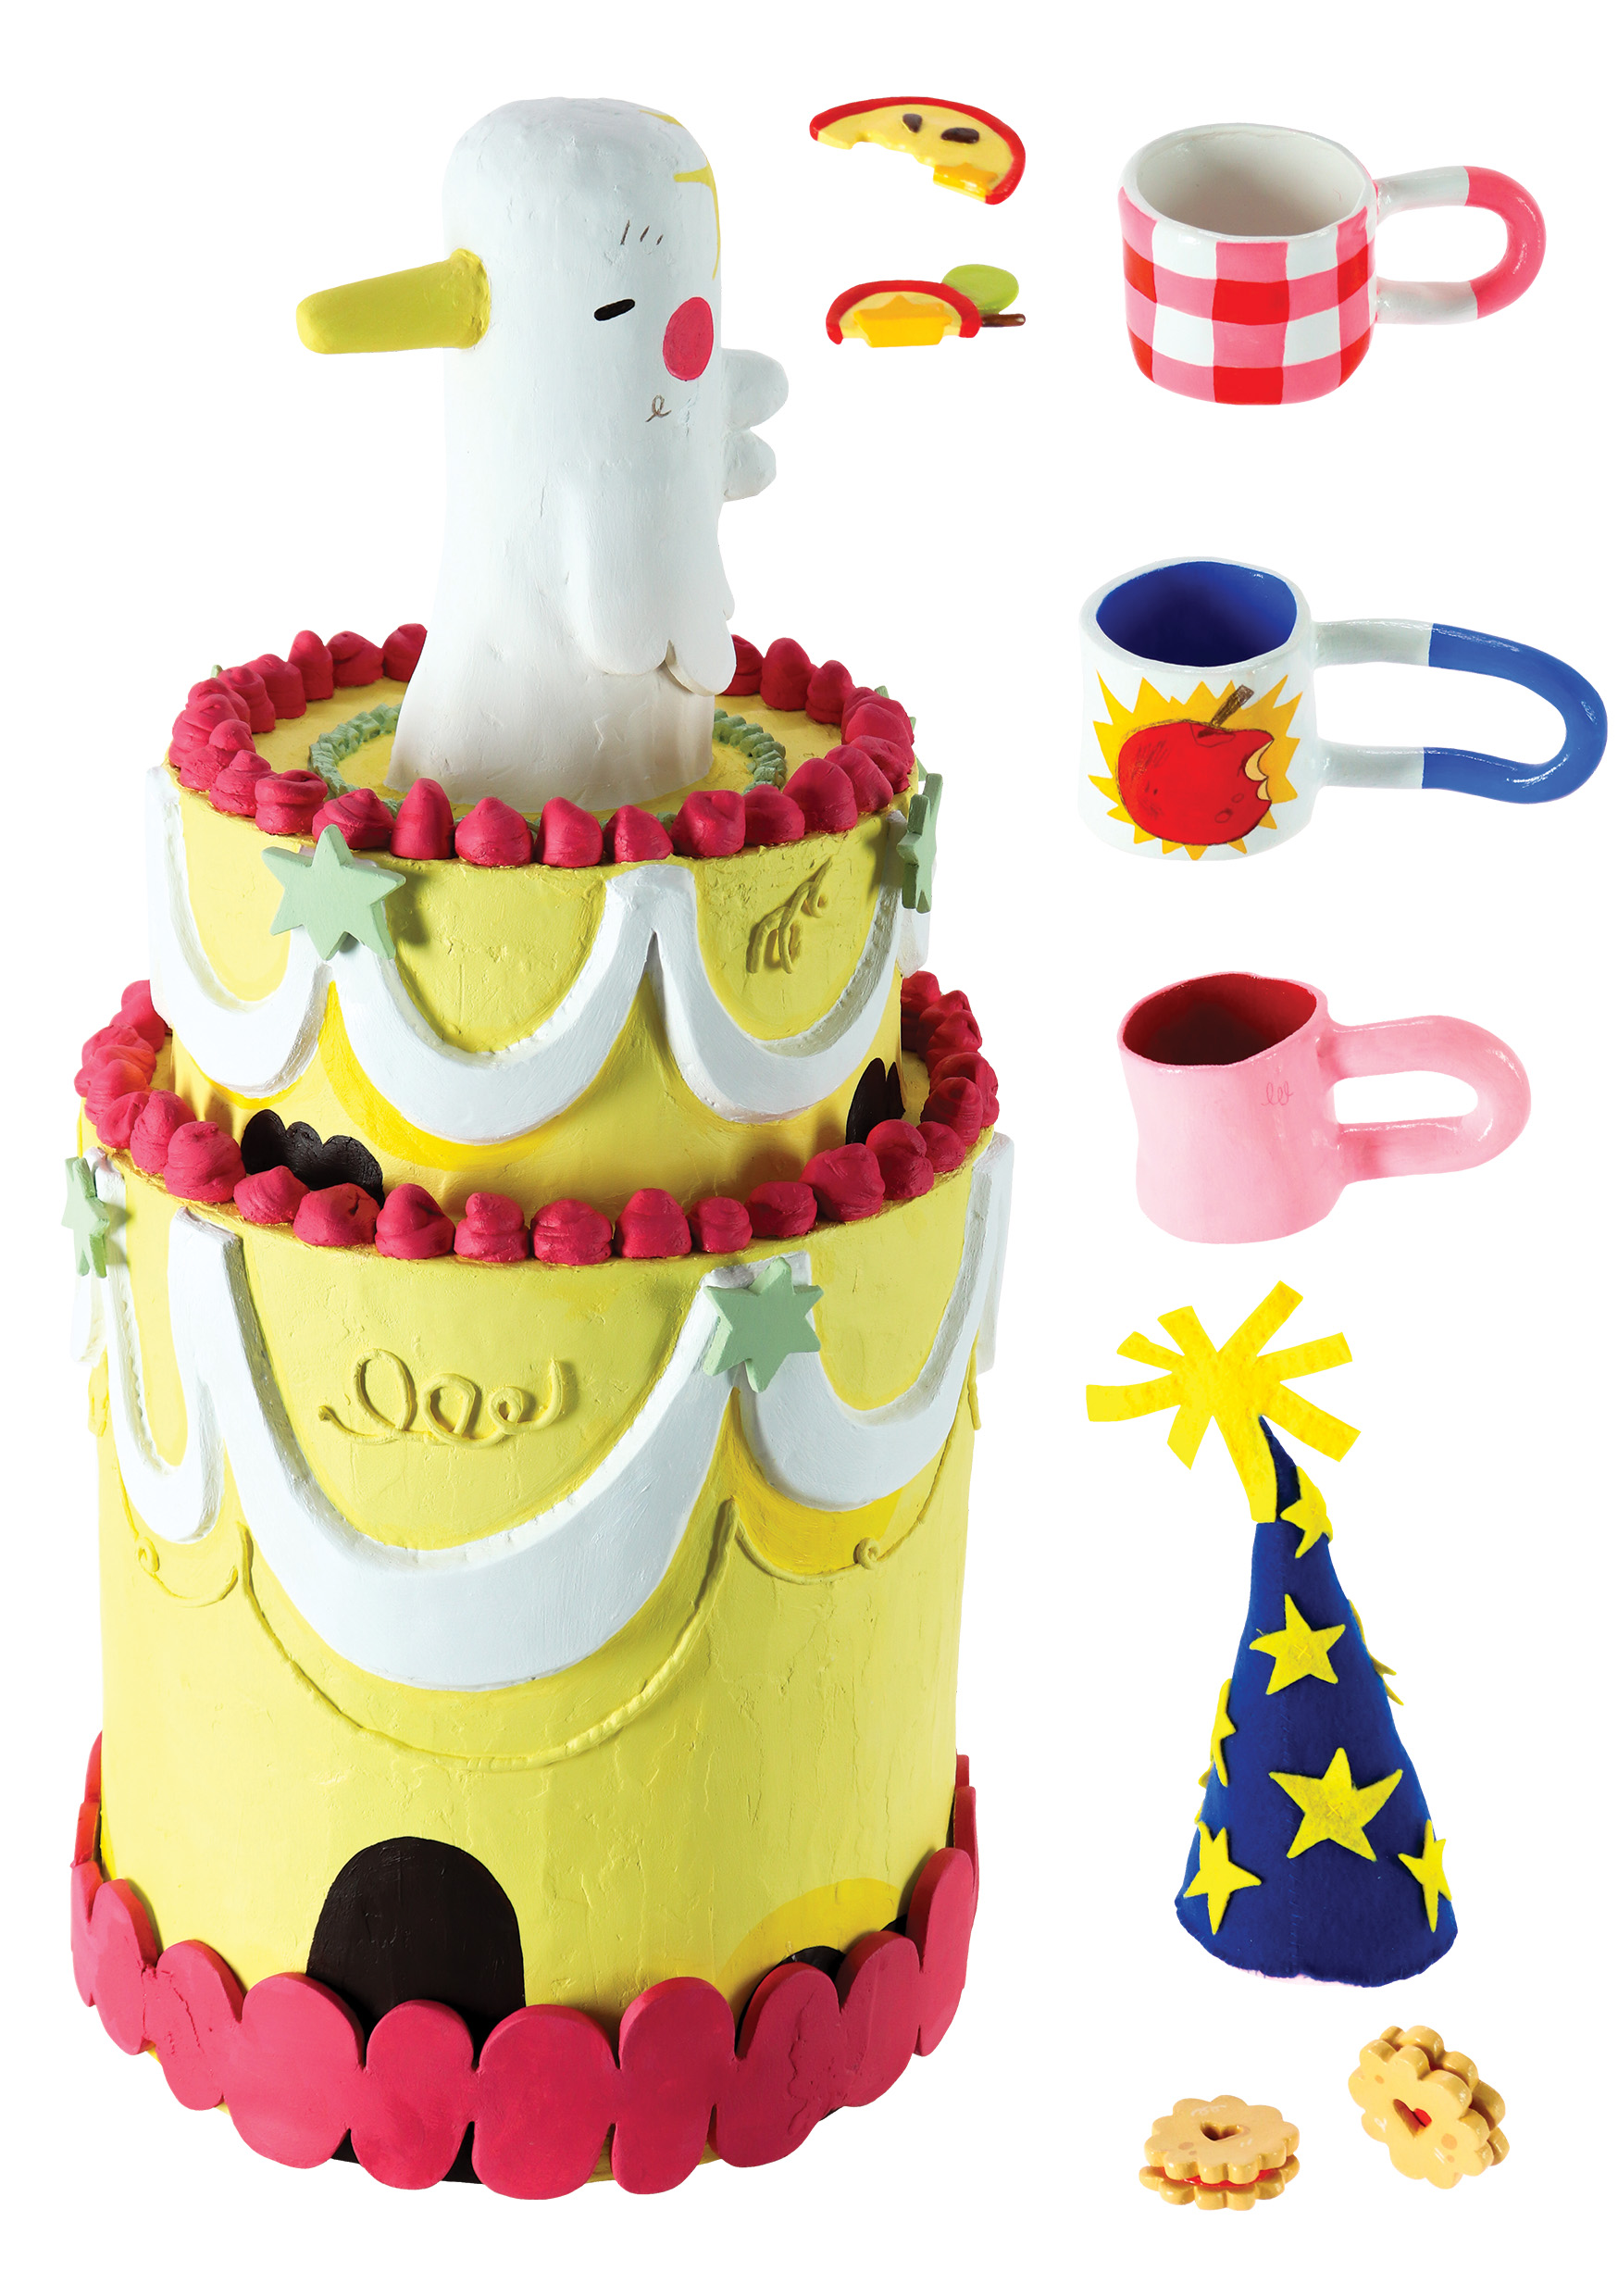 A large 3D duck birthday cake accompanied by ceramic mugs, fruit, and biscuits, and a felt party hat.